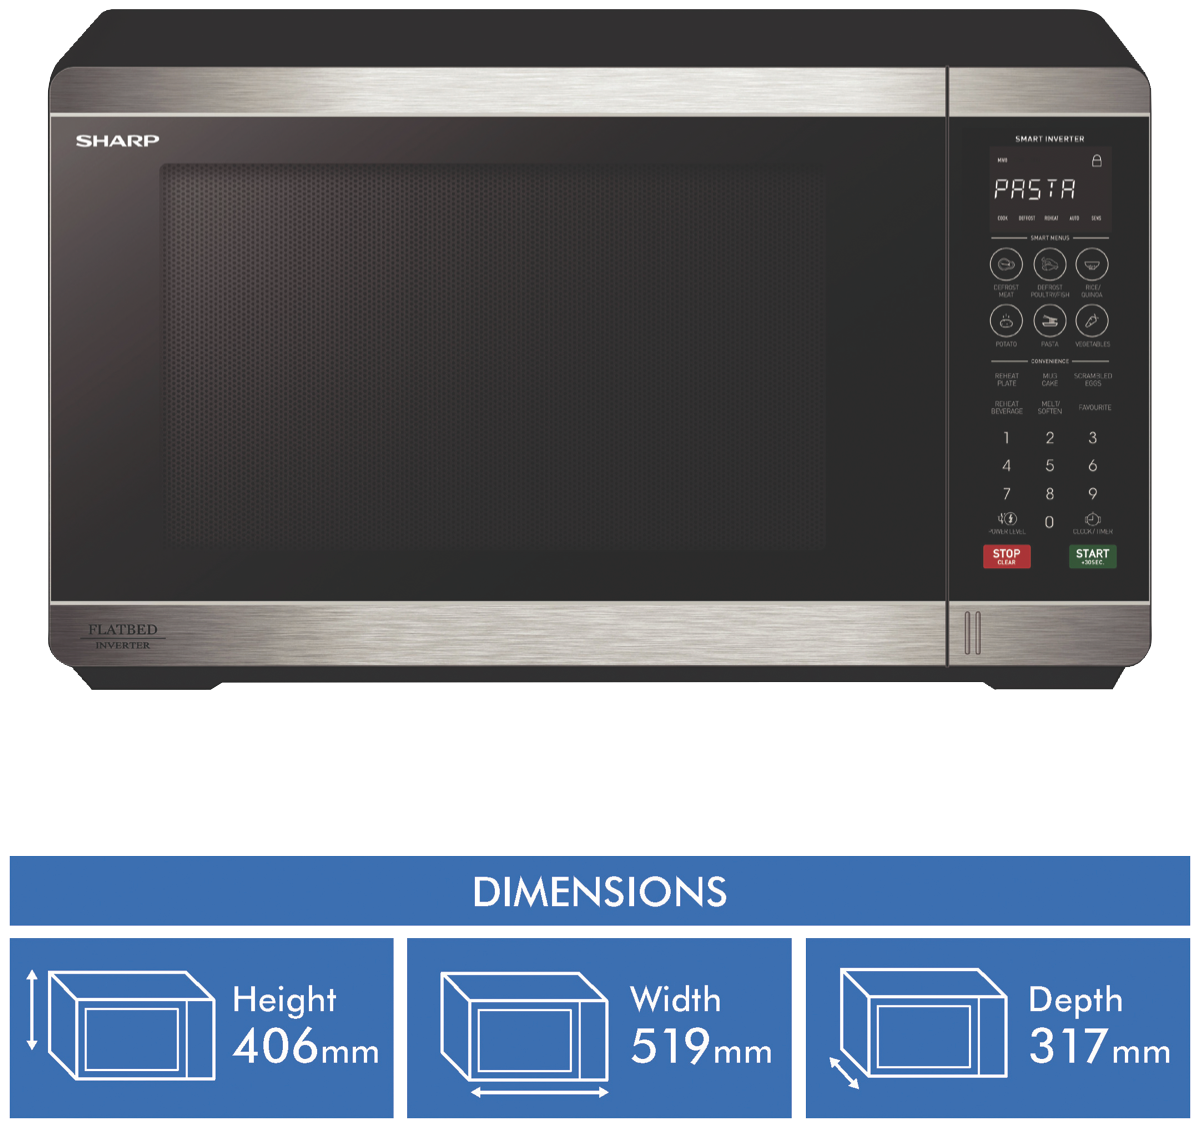 Sharp SM327FHS 32L 1200W Flatbed Microwave - Black S/Steel at The Good Guys